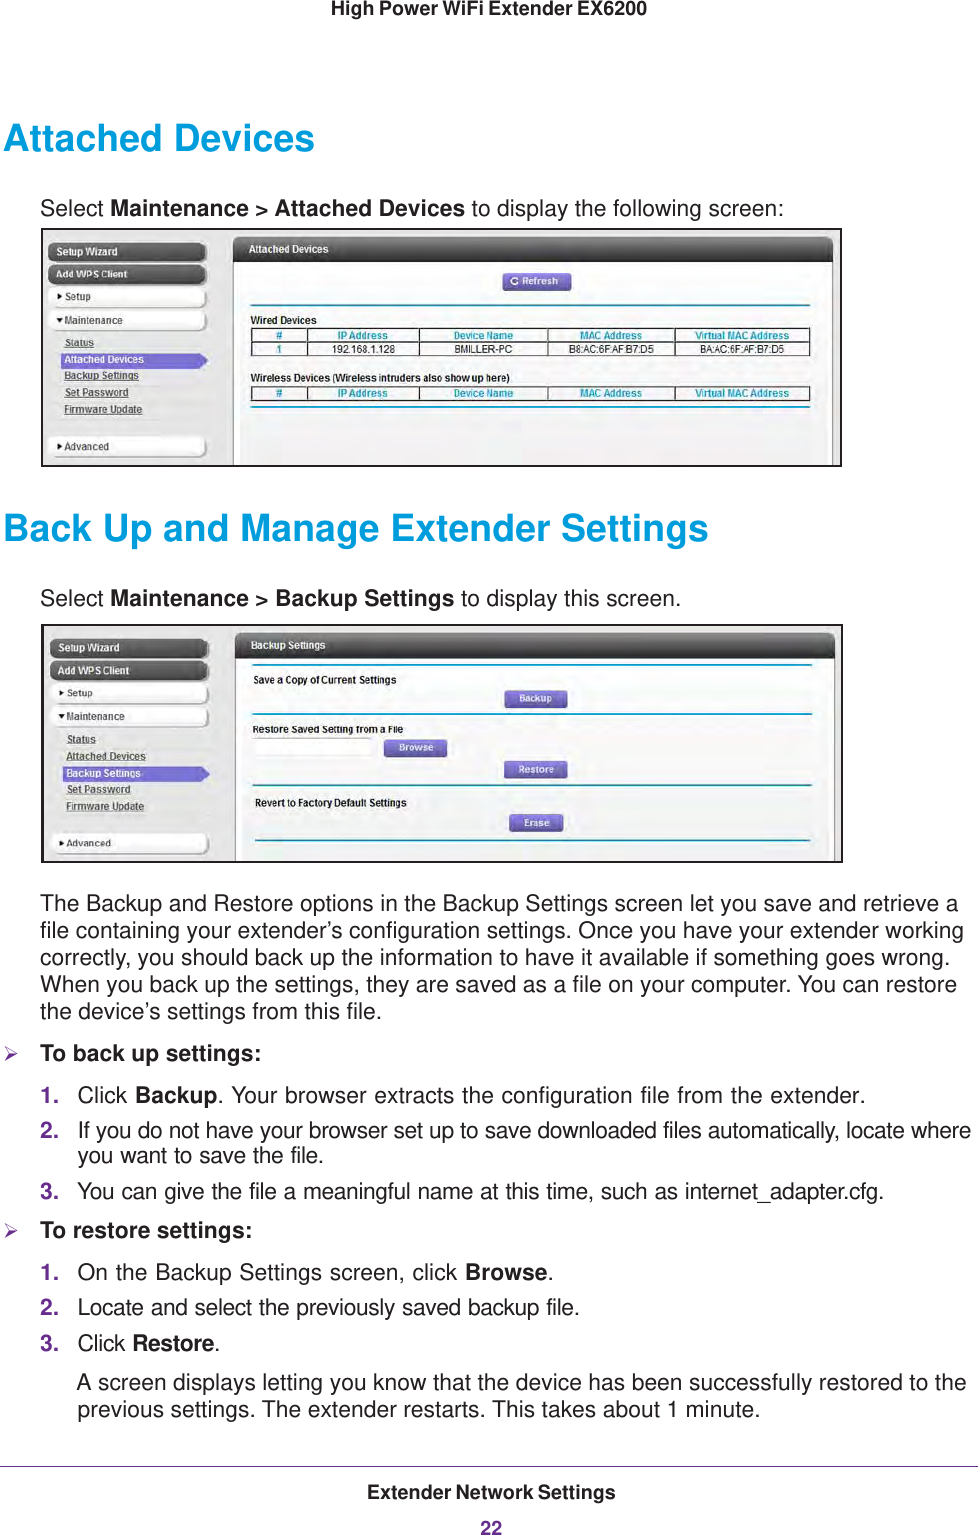 Extender Network Settings22High Power WiFi Extender EX6200 Attached DevicesSelect Maintenance &gt; Attached Devices to display the following screen:Back Up and Manage Extender SettingsSelect Maintenance &gt; Backup Settings to display this screen.The Backup and Restore options in the Backup Settings screen let you save and retrieve a file containing your extender’s configuration settings. Once you have your extender working correctly, you should back up the information to have it available if something goes wrong. When you back up the settings, they are saved as a file on your computer. You can restore the device’s settings from this file.To back up settings:1. Click Backup. Your browser extracts the configuration file from the extender.2. If you do not have your browser set up to save downloaded files automatically, locate where you want to save the file. 3. You can give the file a meaningful name at this time, such as internet_adapter.cfg. To restore settings:1. On the Backup Settings screen, click Browse.2. Locate and select the previously saved backup file.3. Click Restore.A screen displays letting you know that the device has been successfully restored to the previous settings. The extender restarts. This takes about 1 minute.